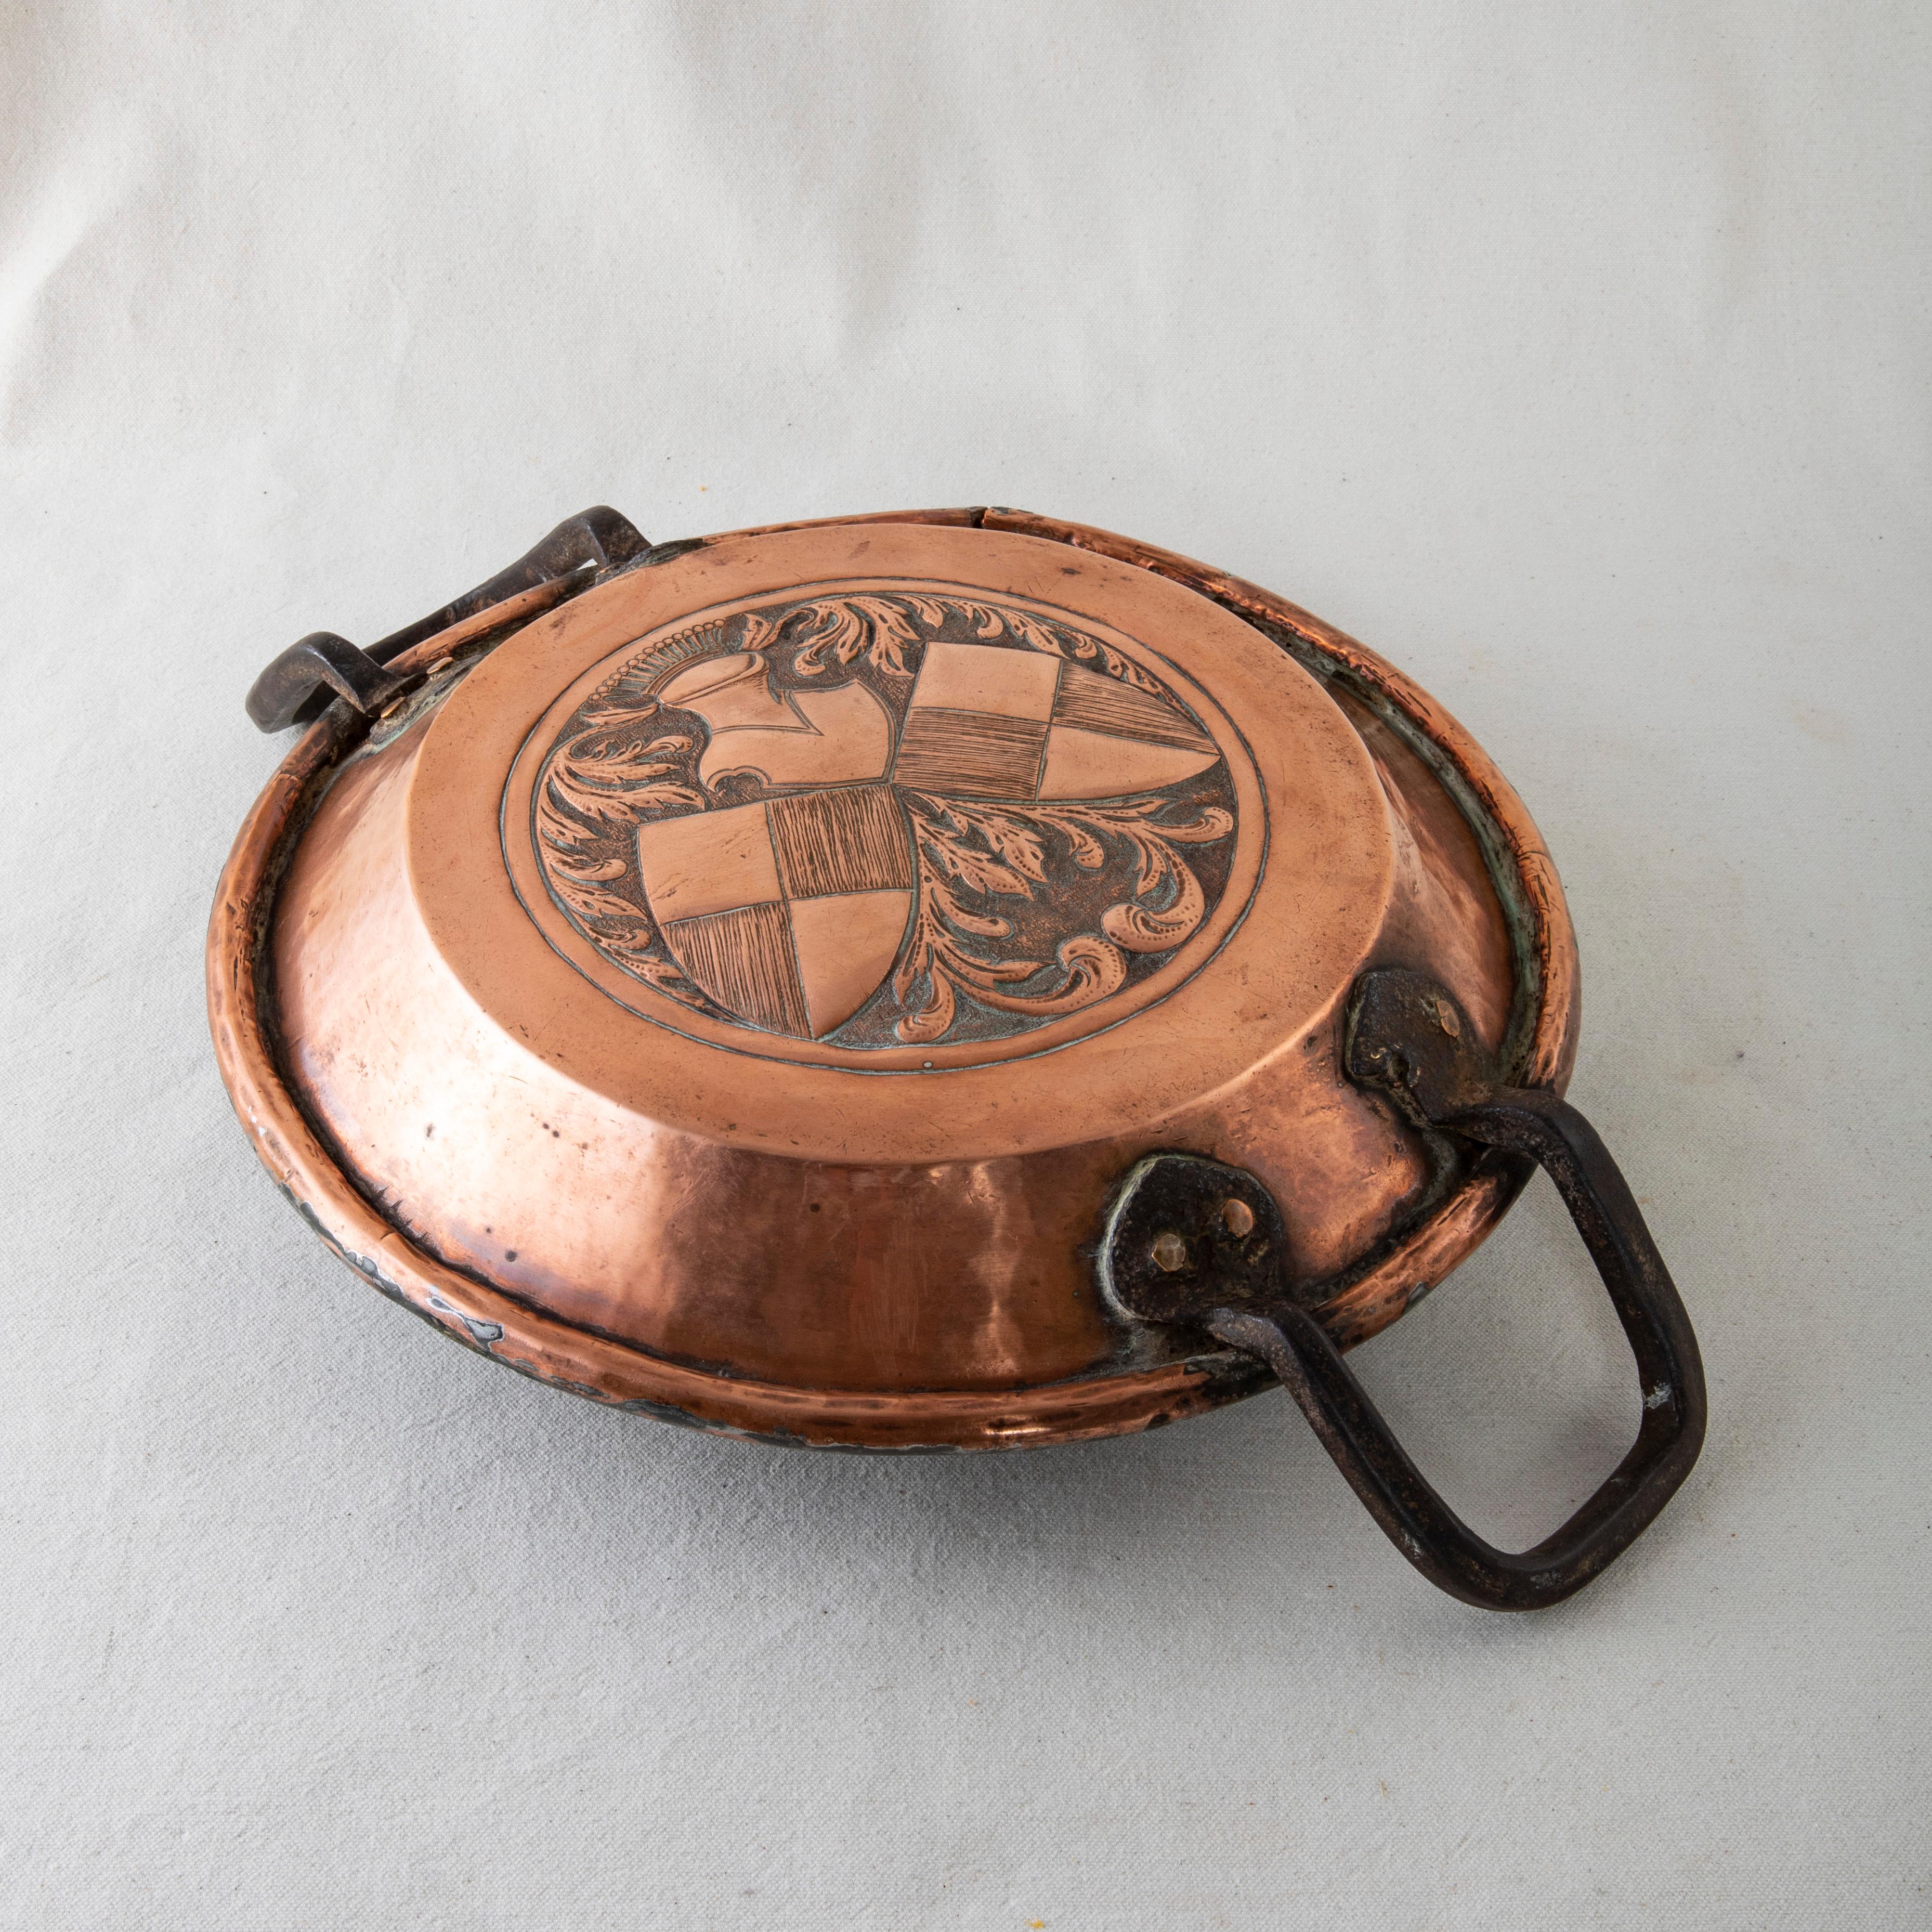 Originally used in the kitchen of a French chateau, this late nineteenth century copper repousse tart pan features a crowned frogmouth helmet above two quartered shields. The helmet and shields are surrounded by scrolling leaves. The pan is fitted